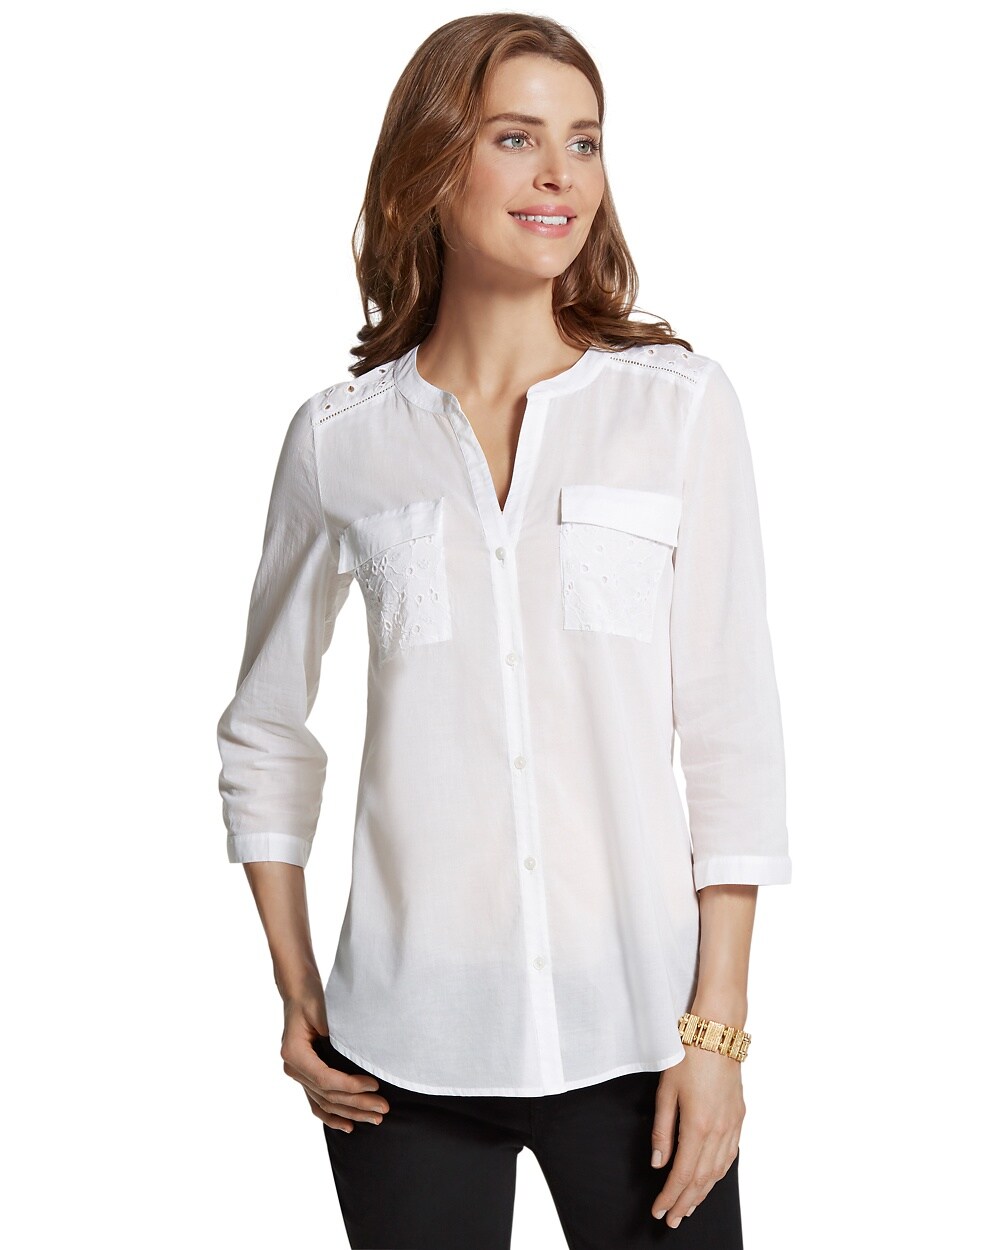 Janel Eyelet Button-Down Shirt - Chico's